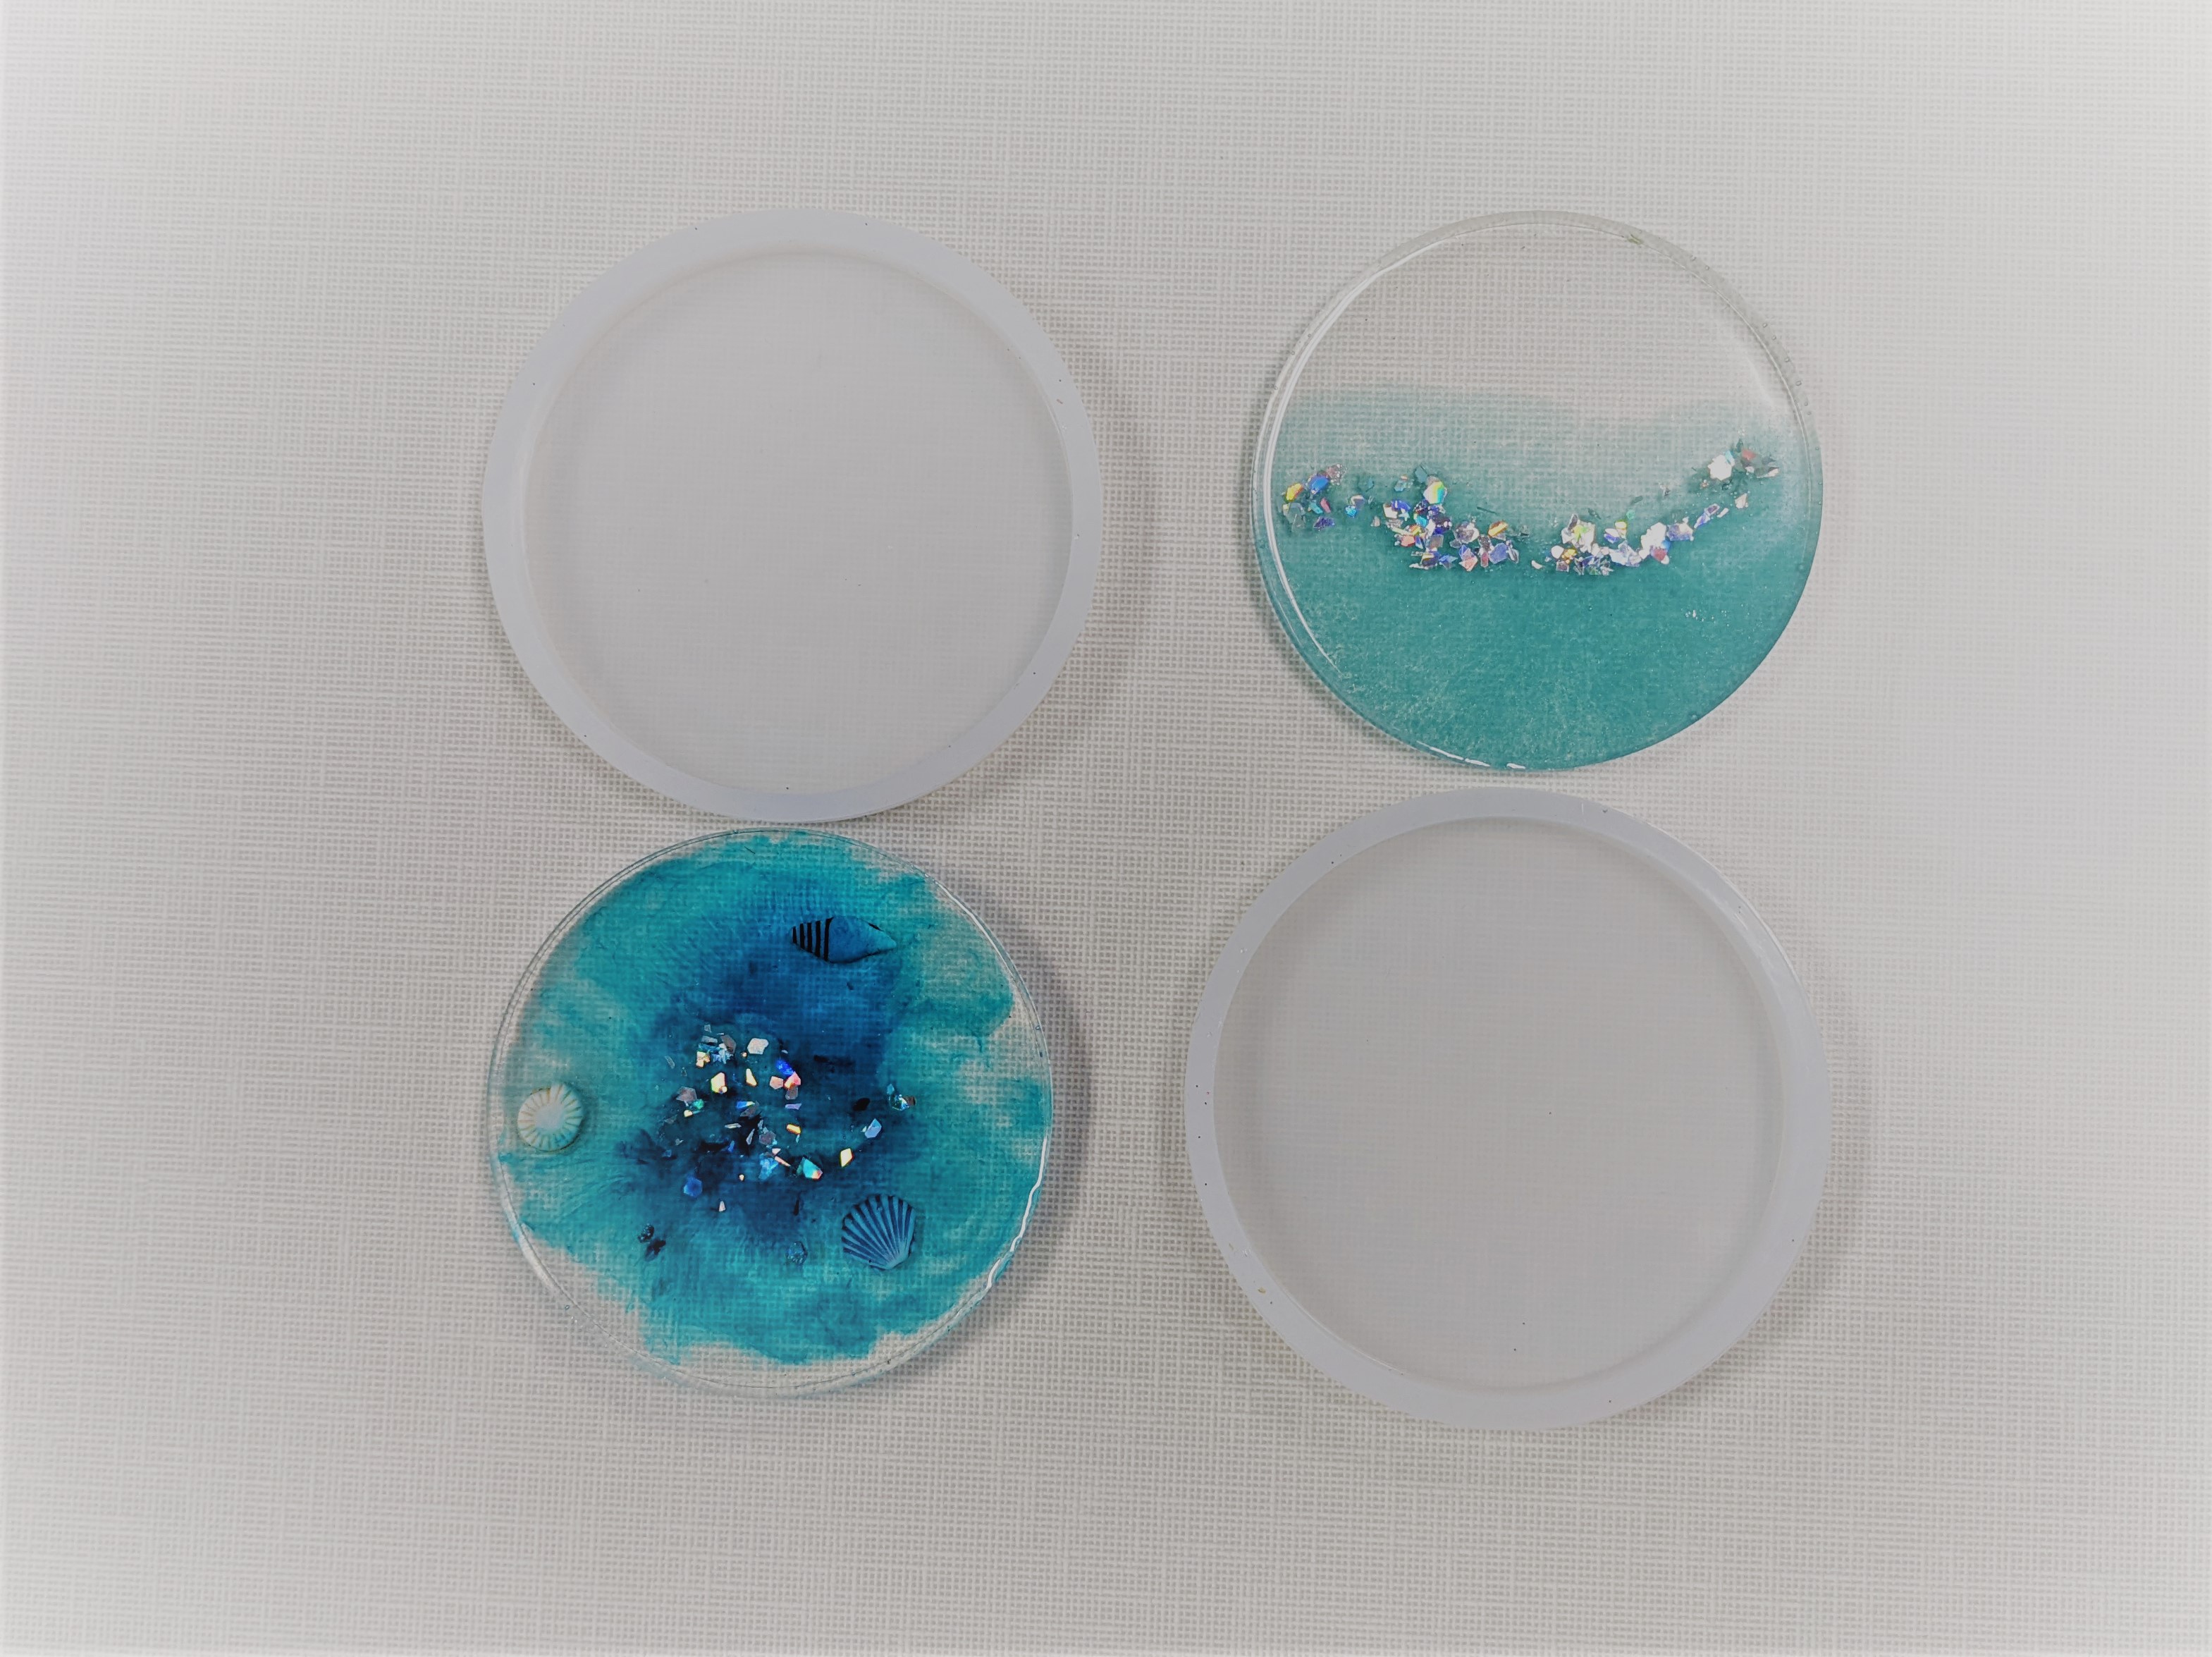 resin coaster with blue color, glitter, and shells, silicone modes, and second resin coaster half blue and half clear with glitter